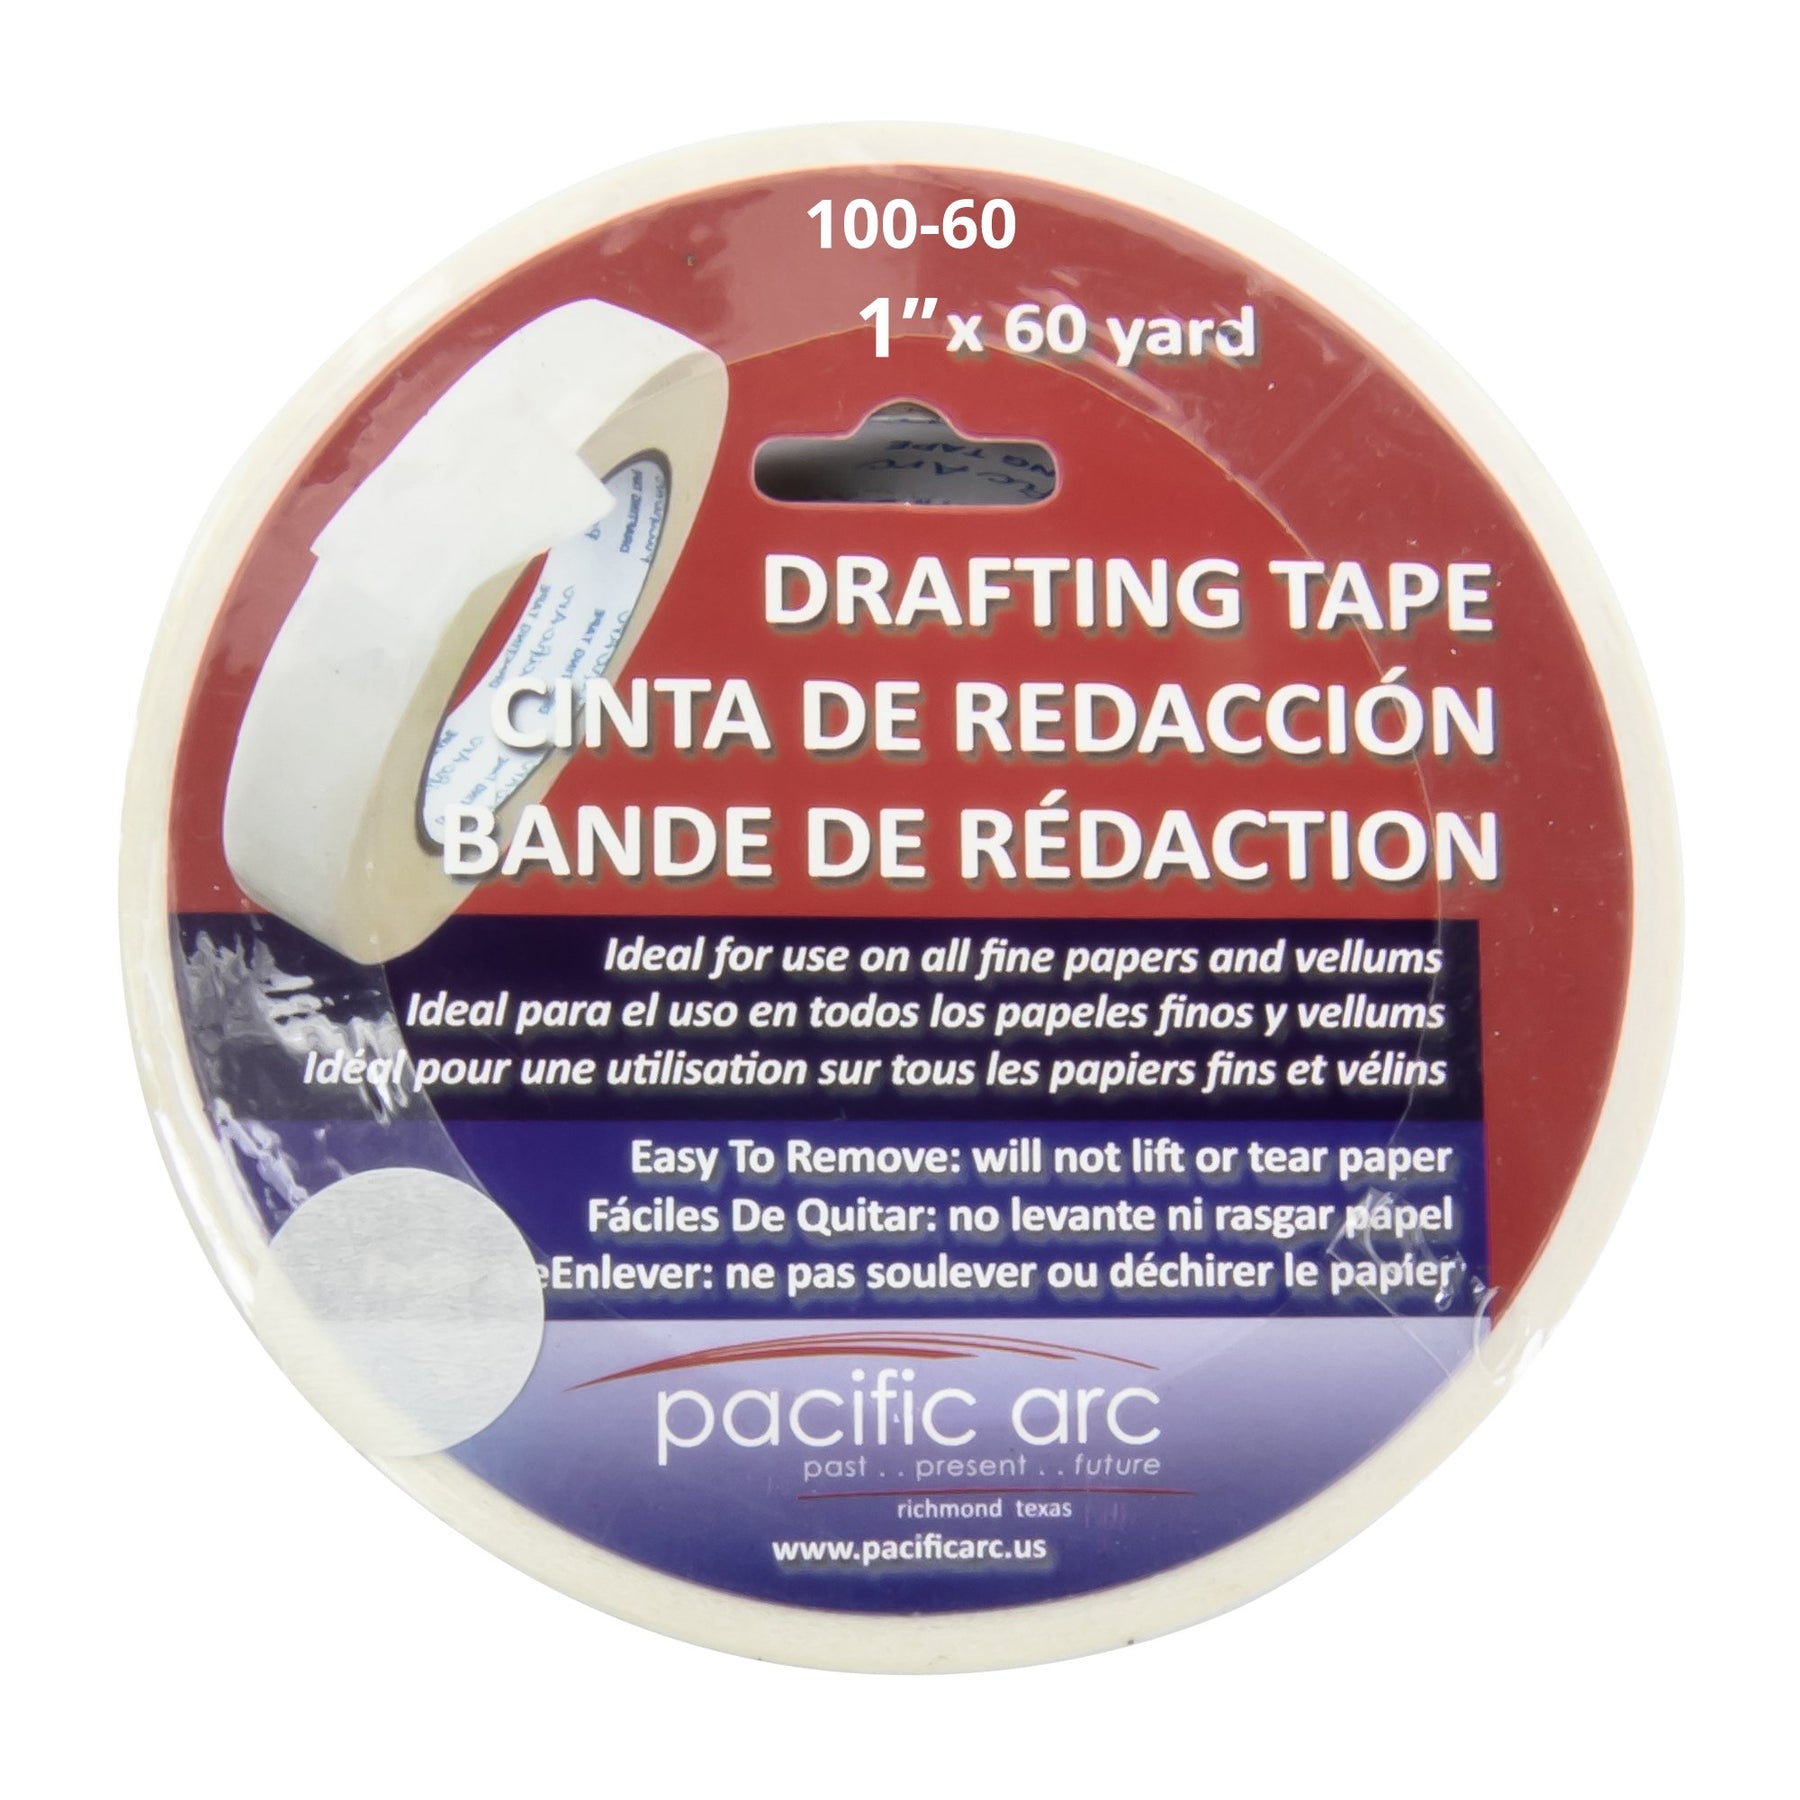 Pacific Arc Drafting Dots 500 Roll